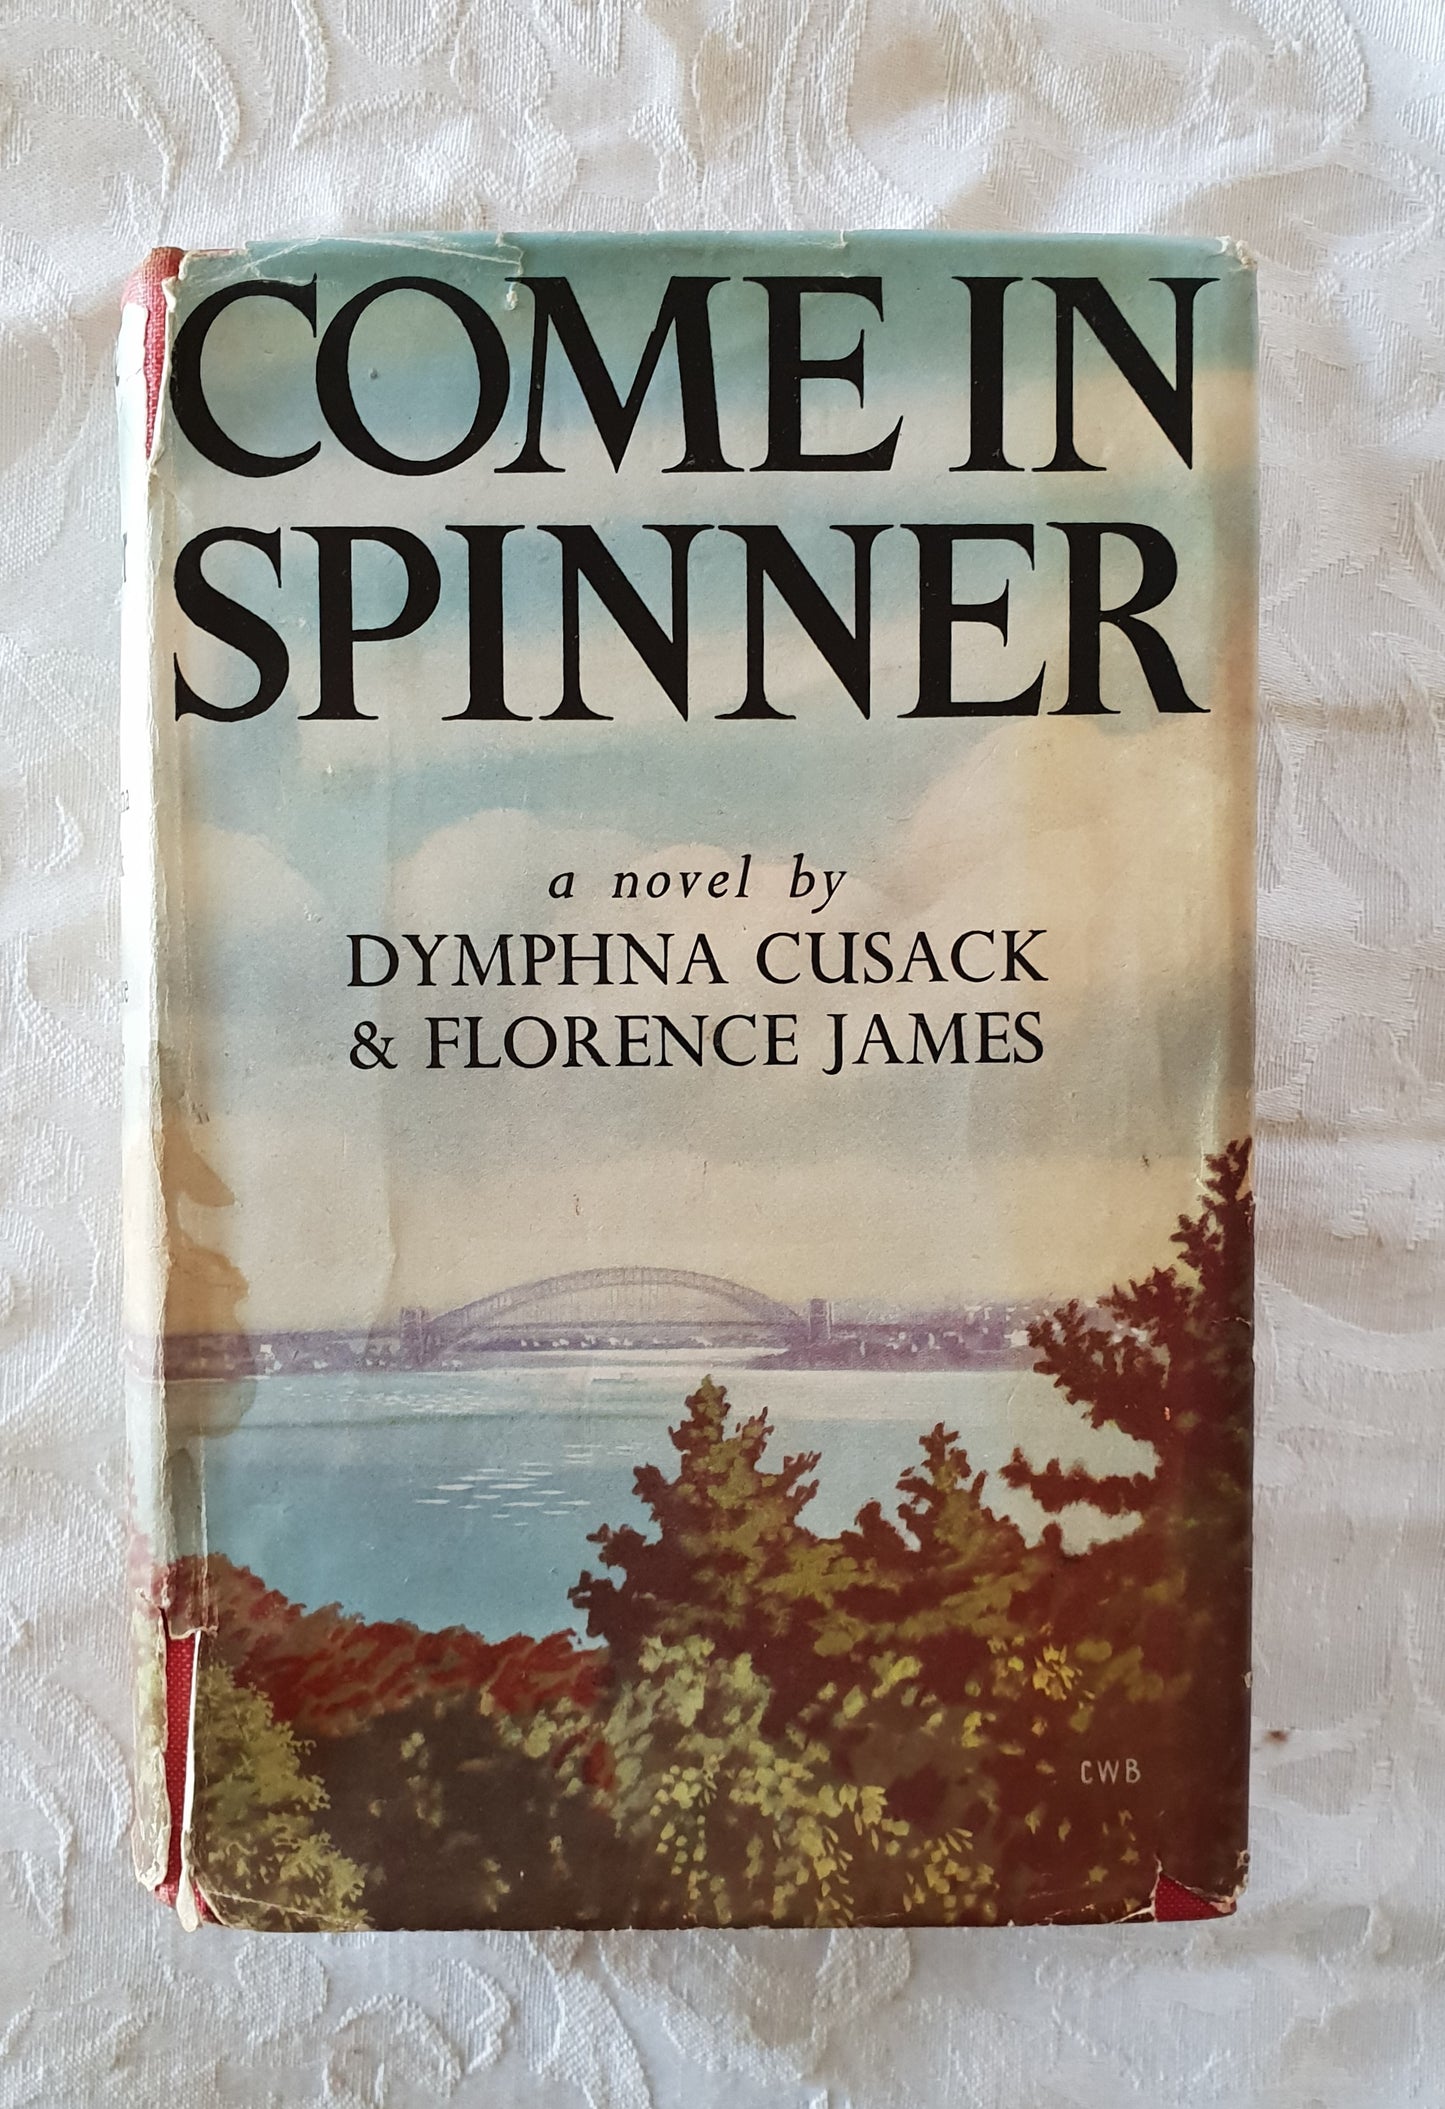 Come In Spinner by Dymphna Cusack & Florence James